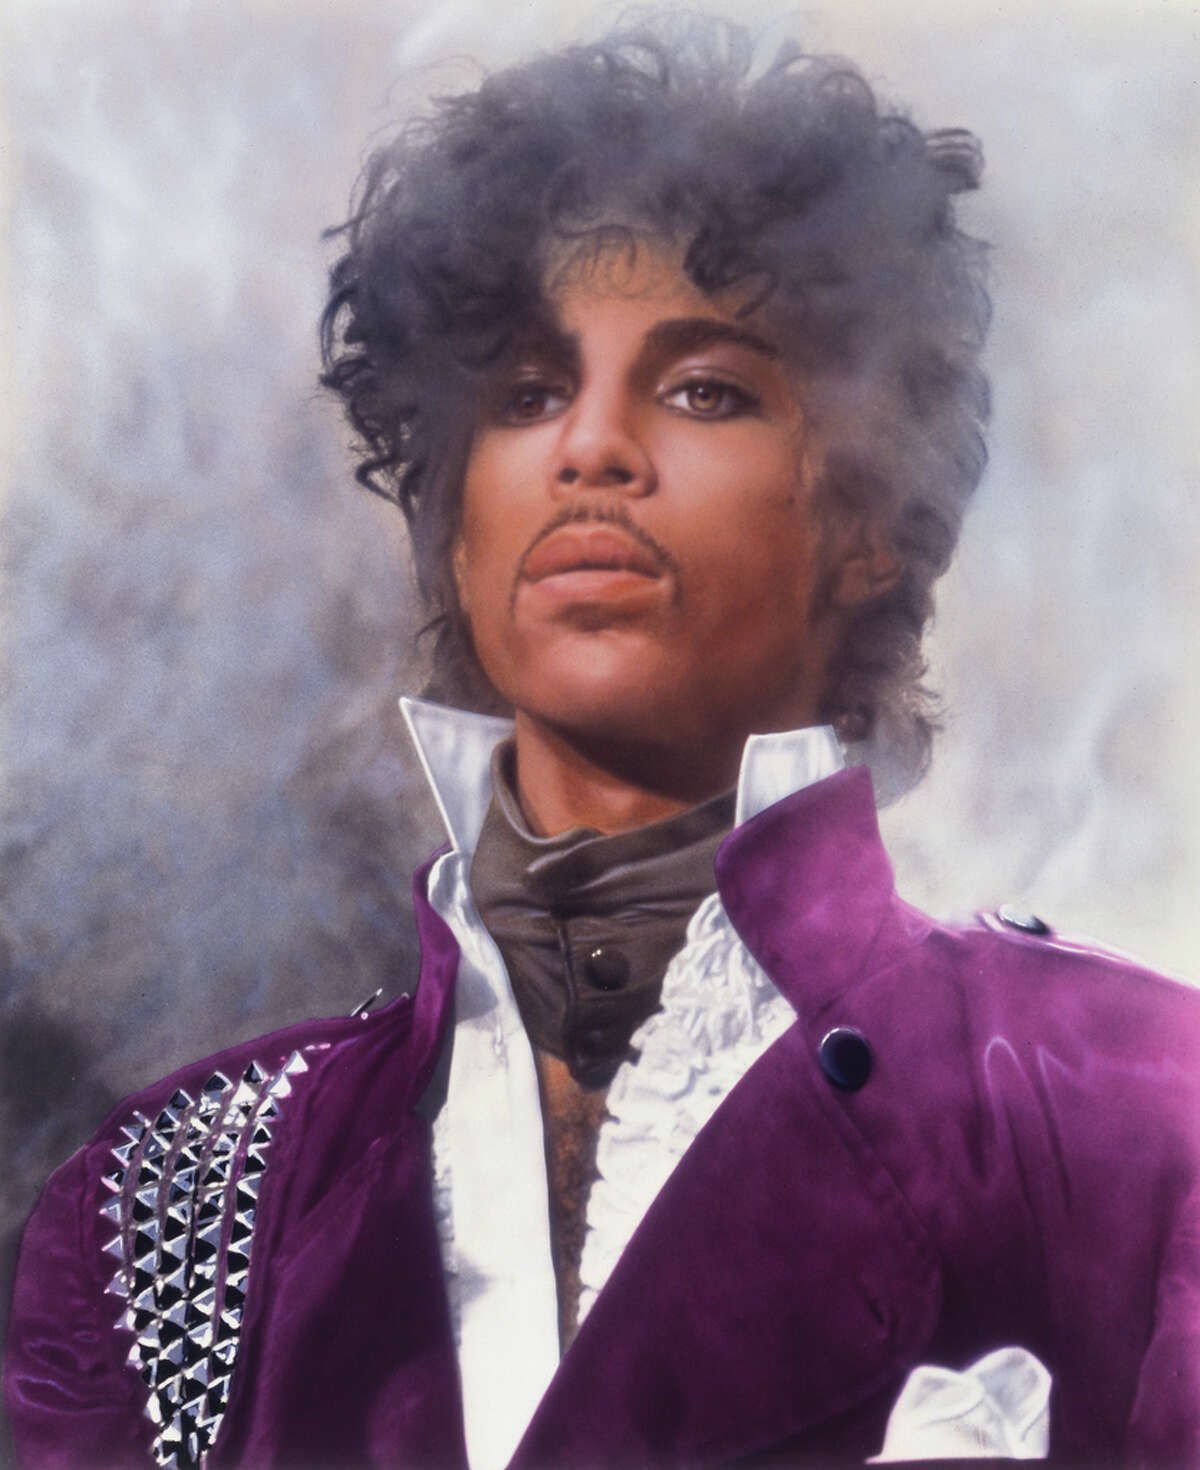 Prince had a major breakthrough with his '1999' album, released in 1982.